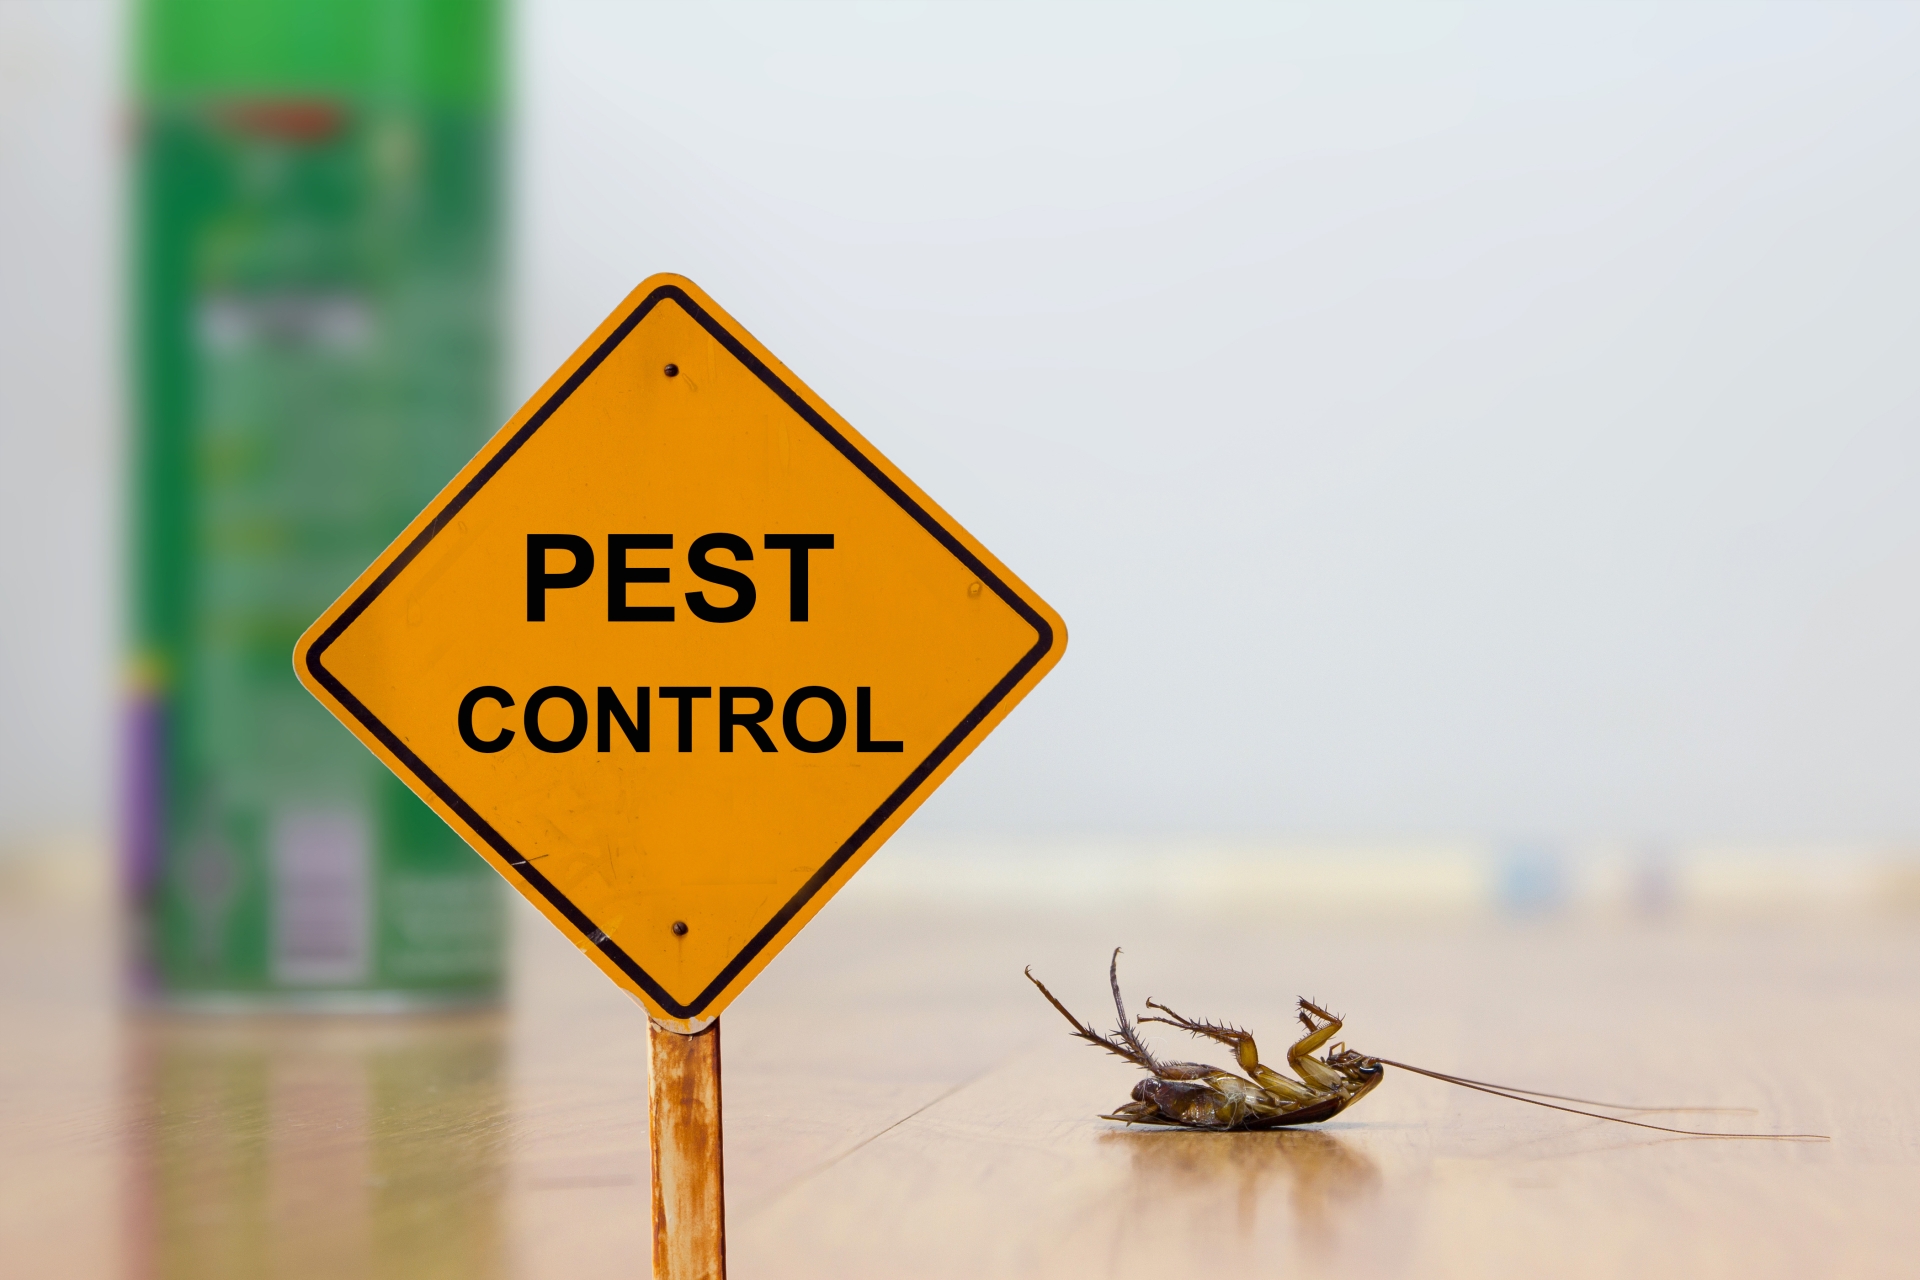 24 Hour Pest Control, Pest Control in Chessington, Hook, KT9. Call Now 020 8166 9746